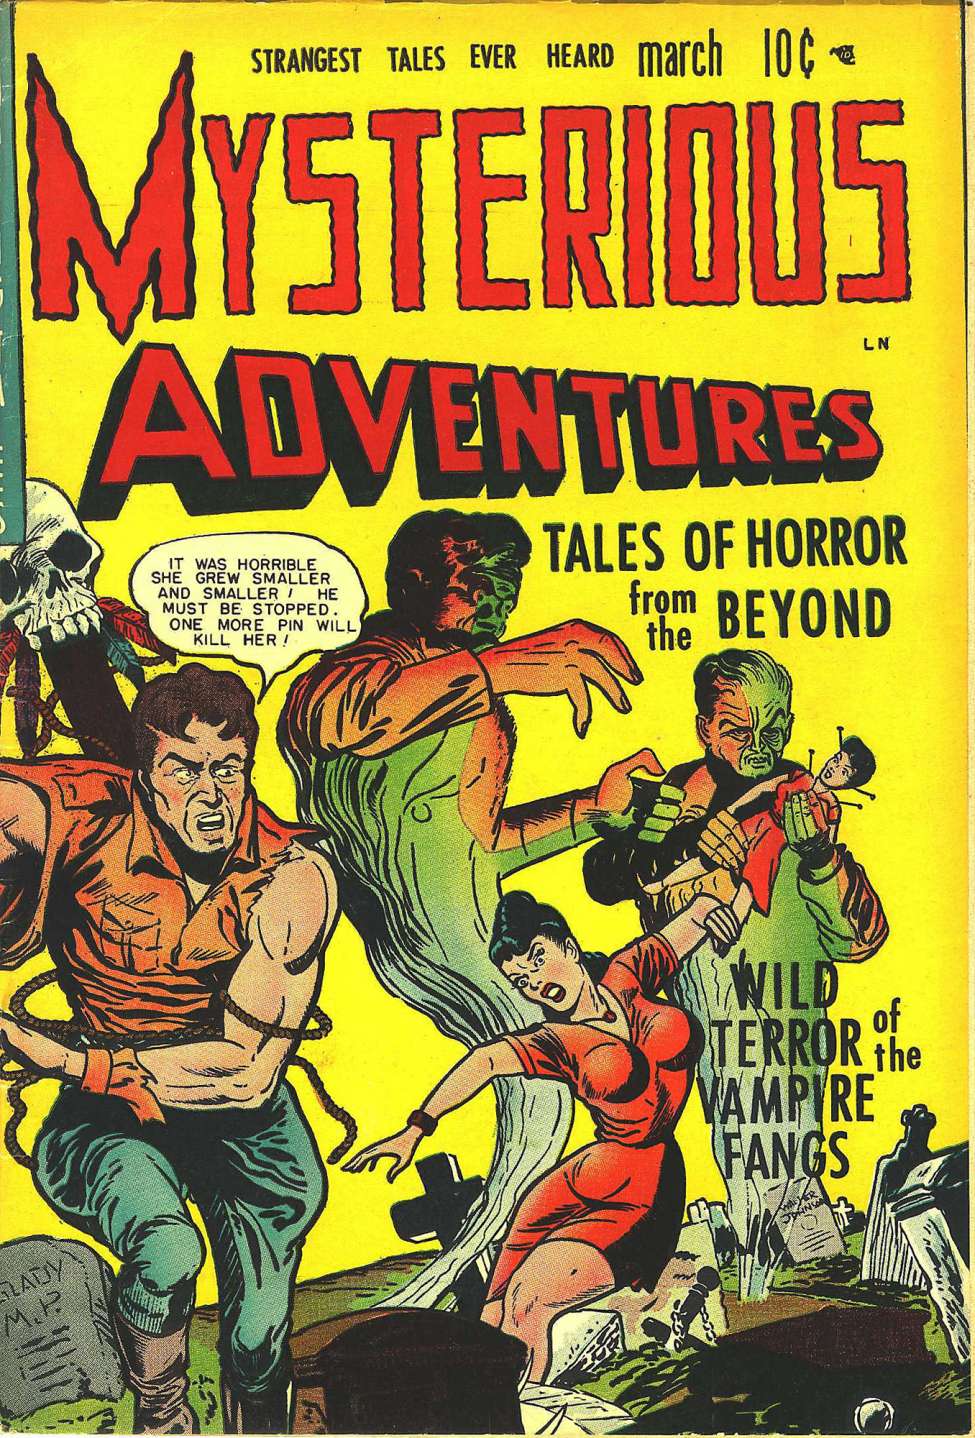 Book Cover For Mysterious Adventures 1 (alt) - Version 2